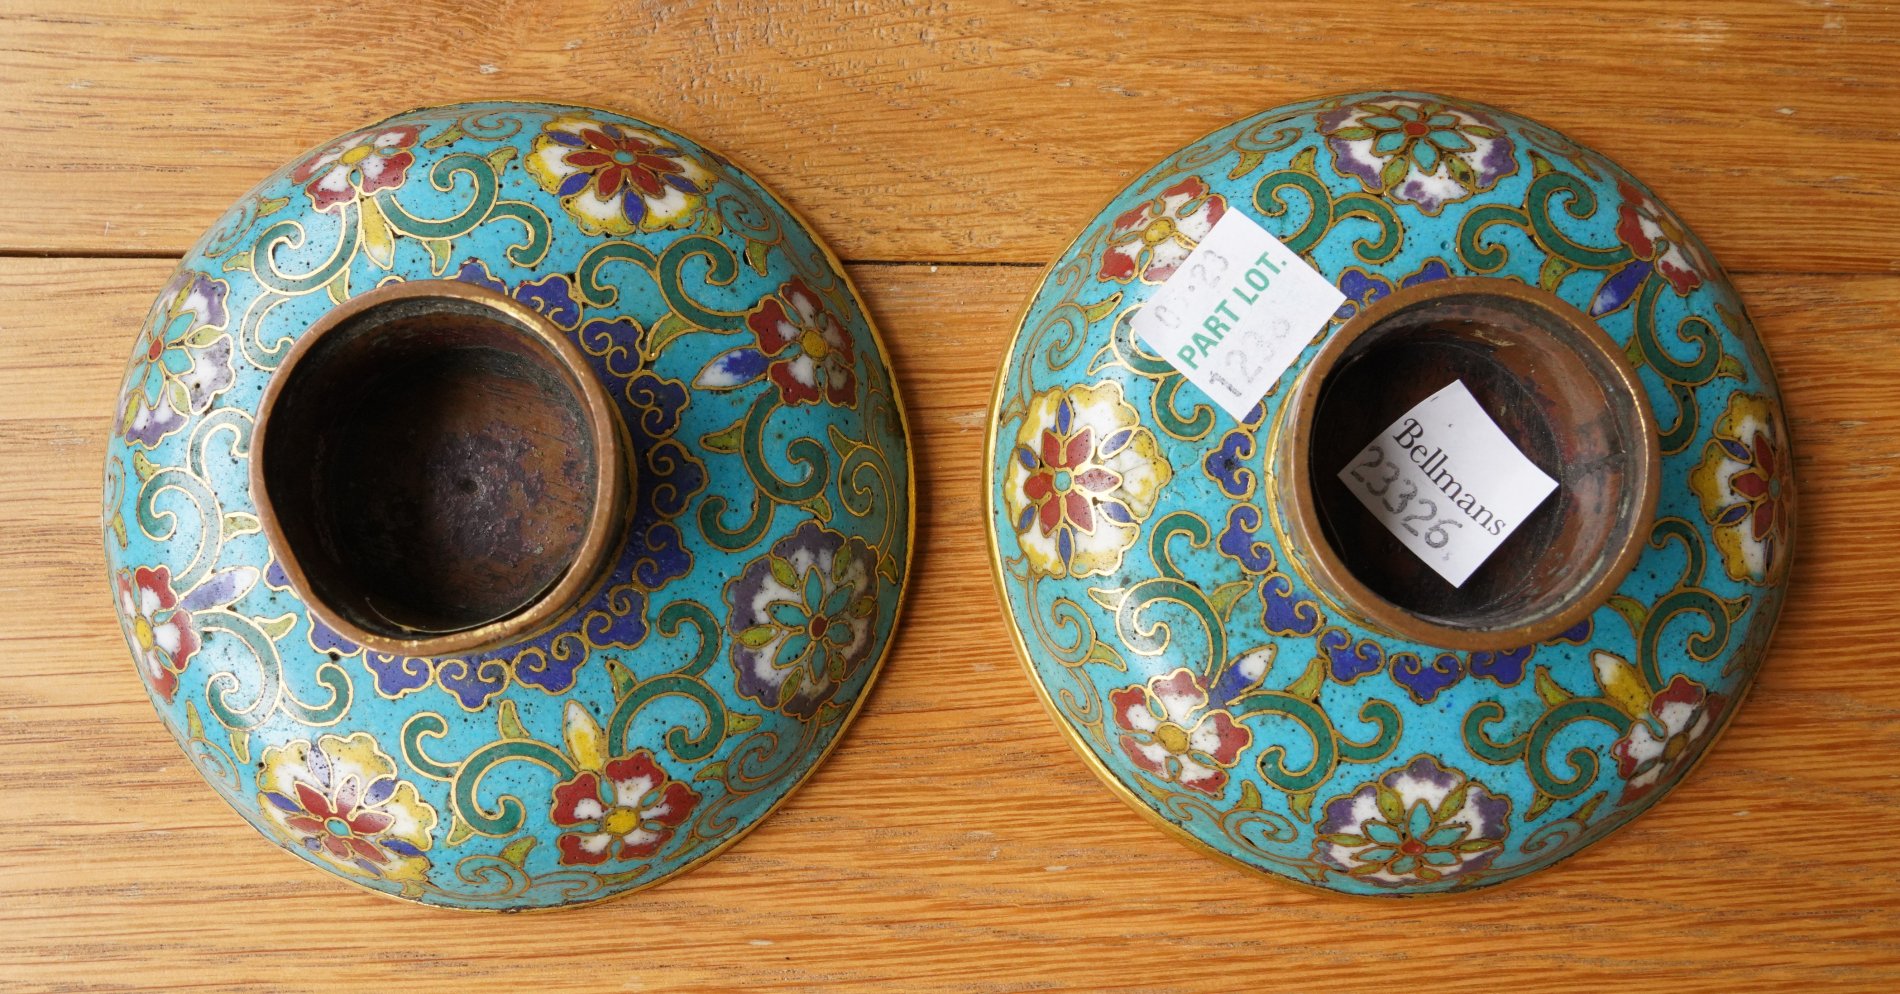 A PAIR OF CHINESE SMALL GILT-BRONZE AND CLOISONNE ENAMEL STEM DISHES (2) - Image 2 of 6